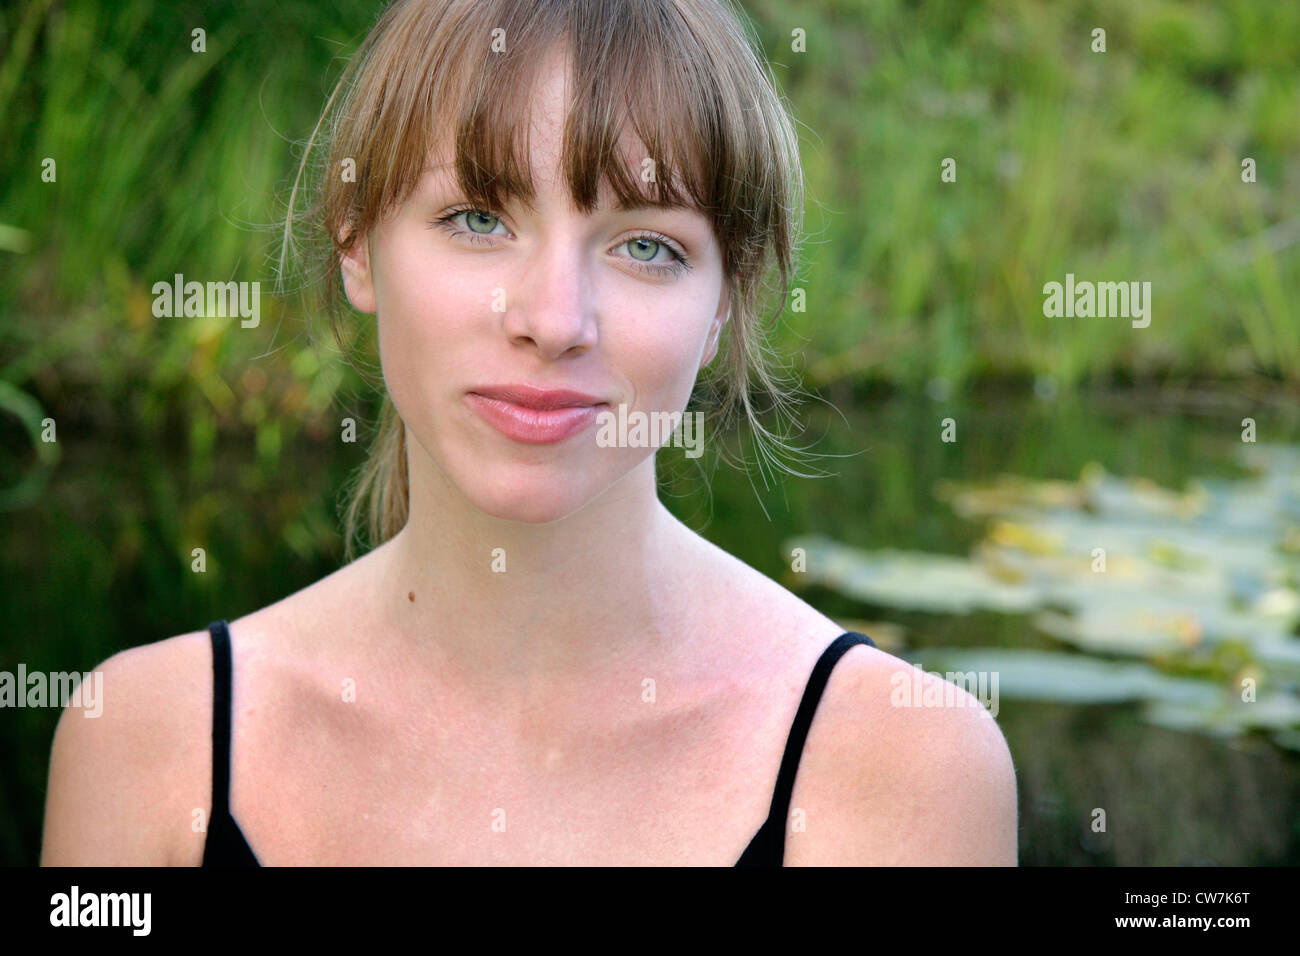 cute young woman with grey eyes Stock Photo, Royalty Free Image ...